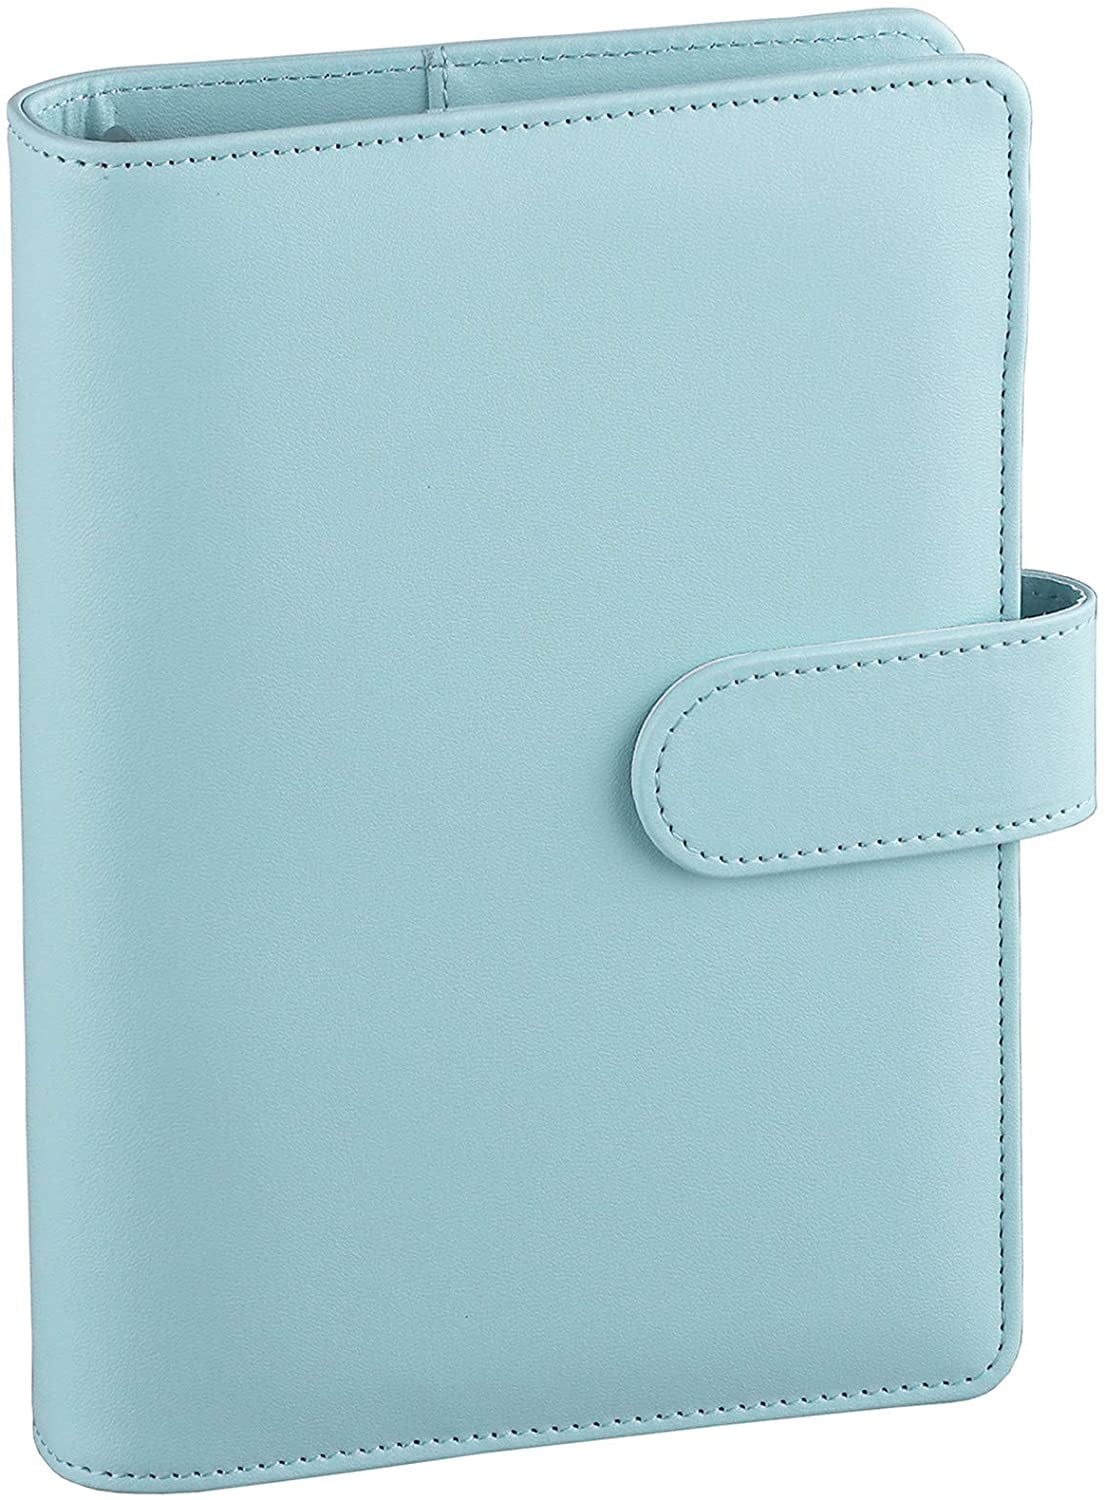 A6 PU Leather Notebook Binder,Refillable 6 Round Ring Binder Cover for A6 Filler Paper,Macaron Notebook Personal Planner Binder with Magnetic Buckle,Robins Egg Blue 